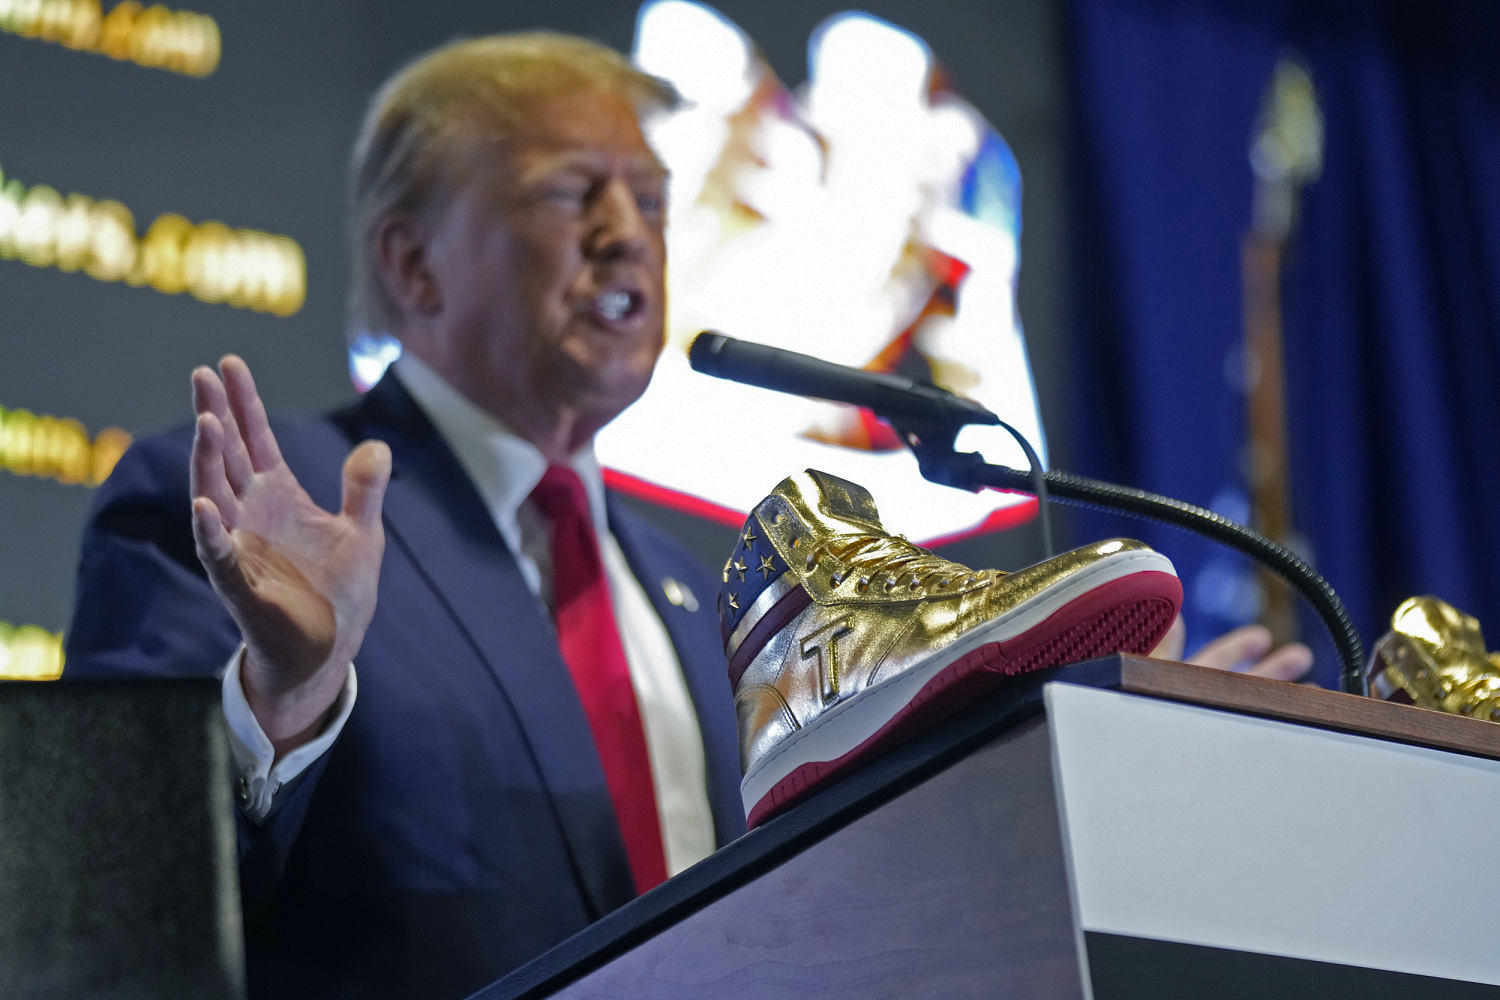 Trump launches a sneaker line